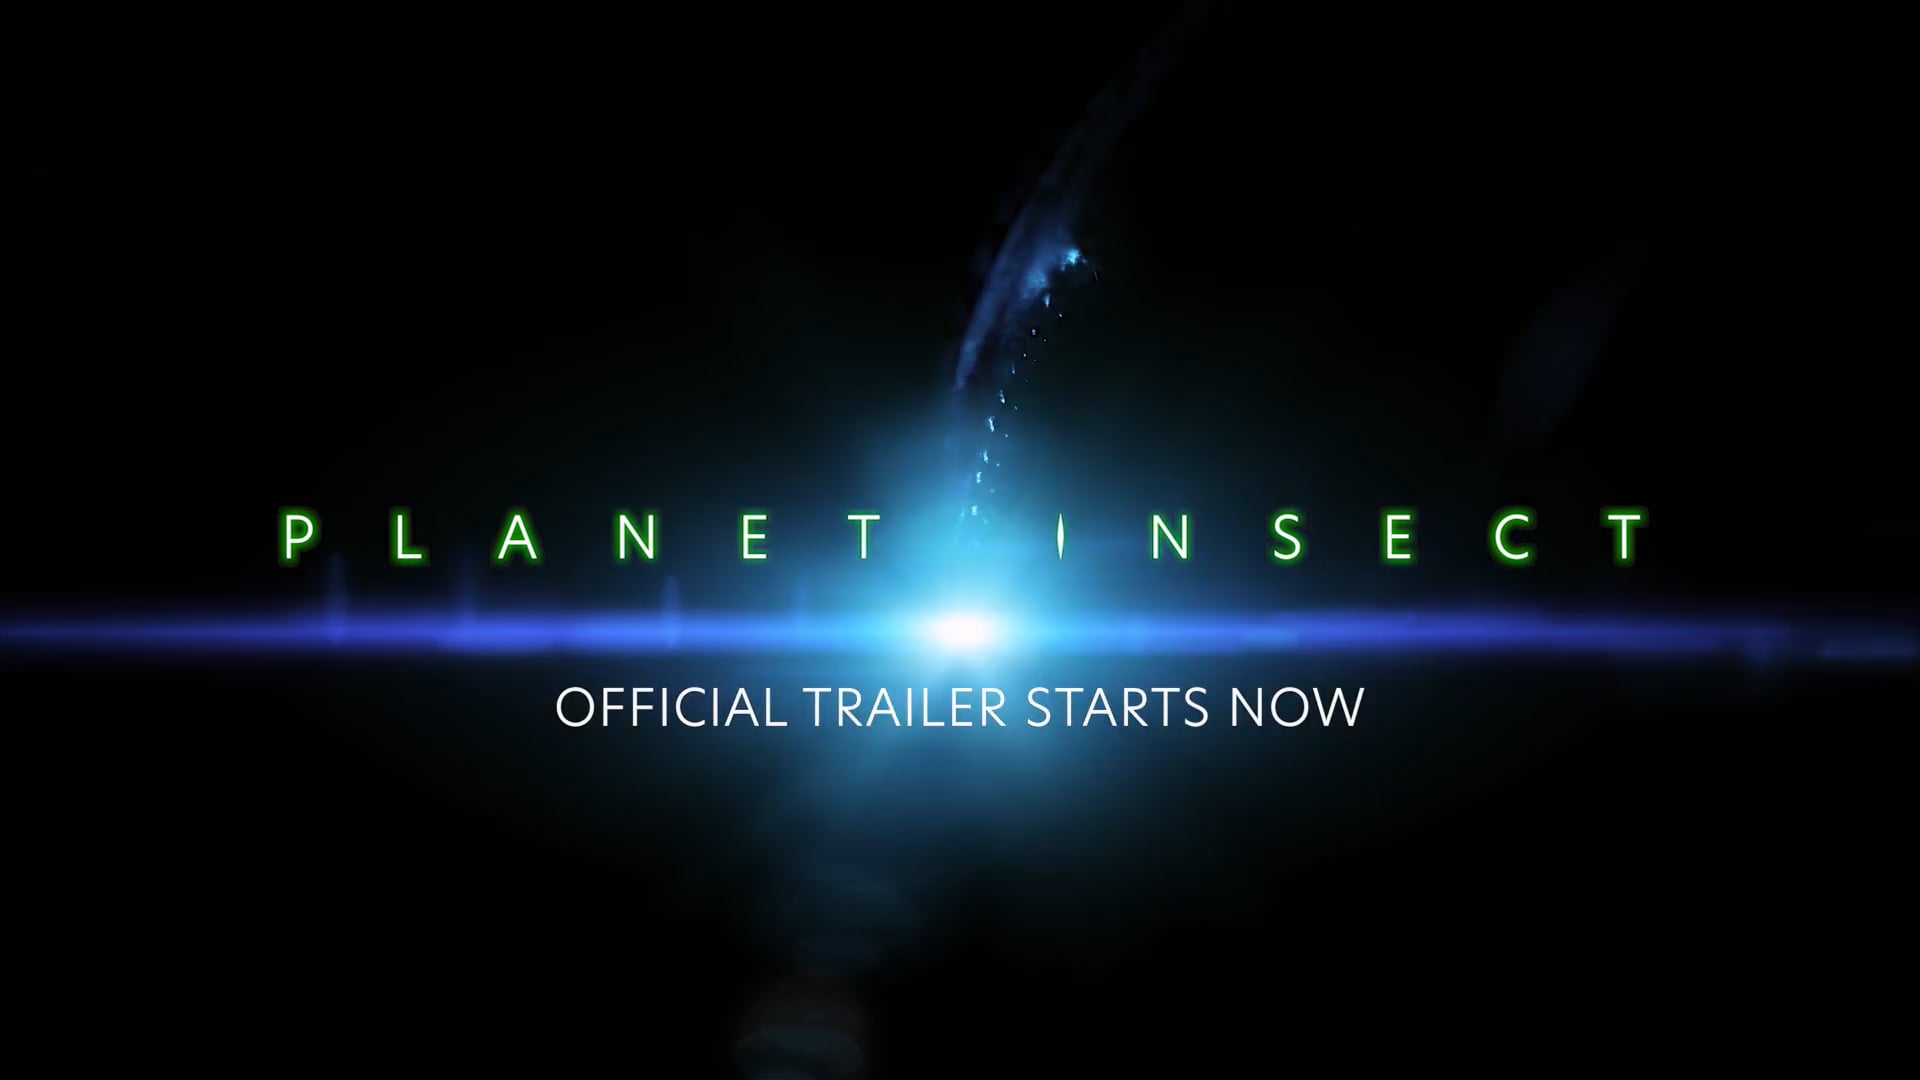 CS - Planet Insect Trailer